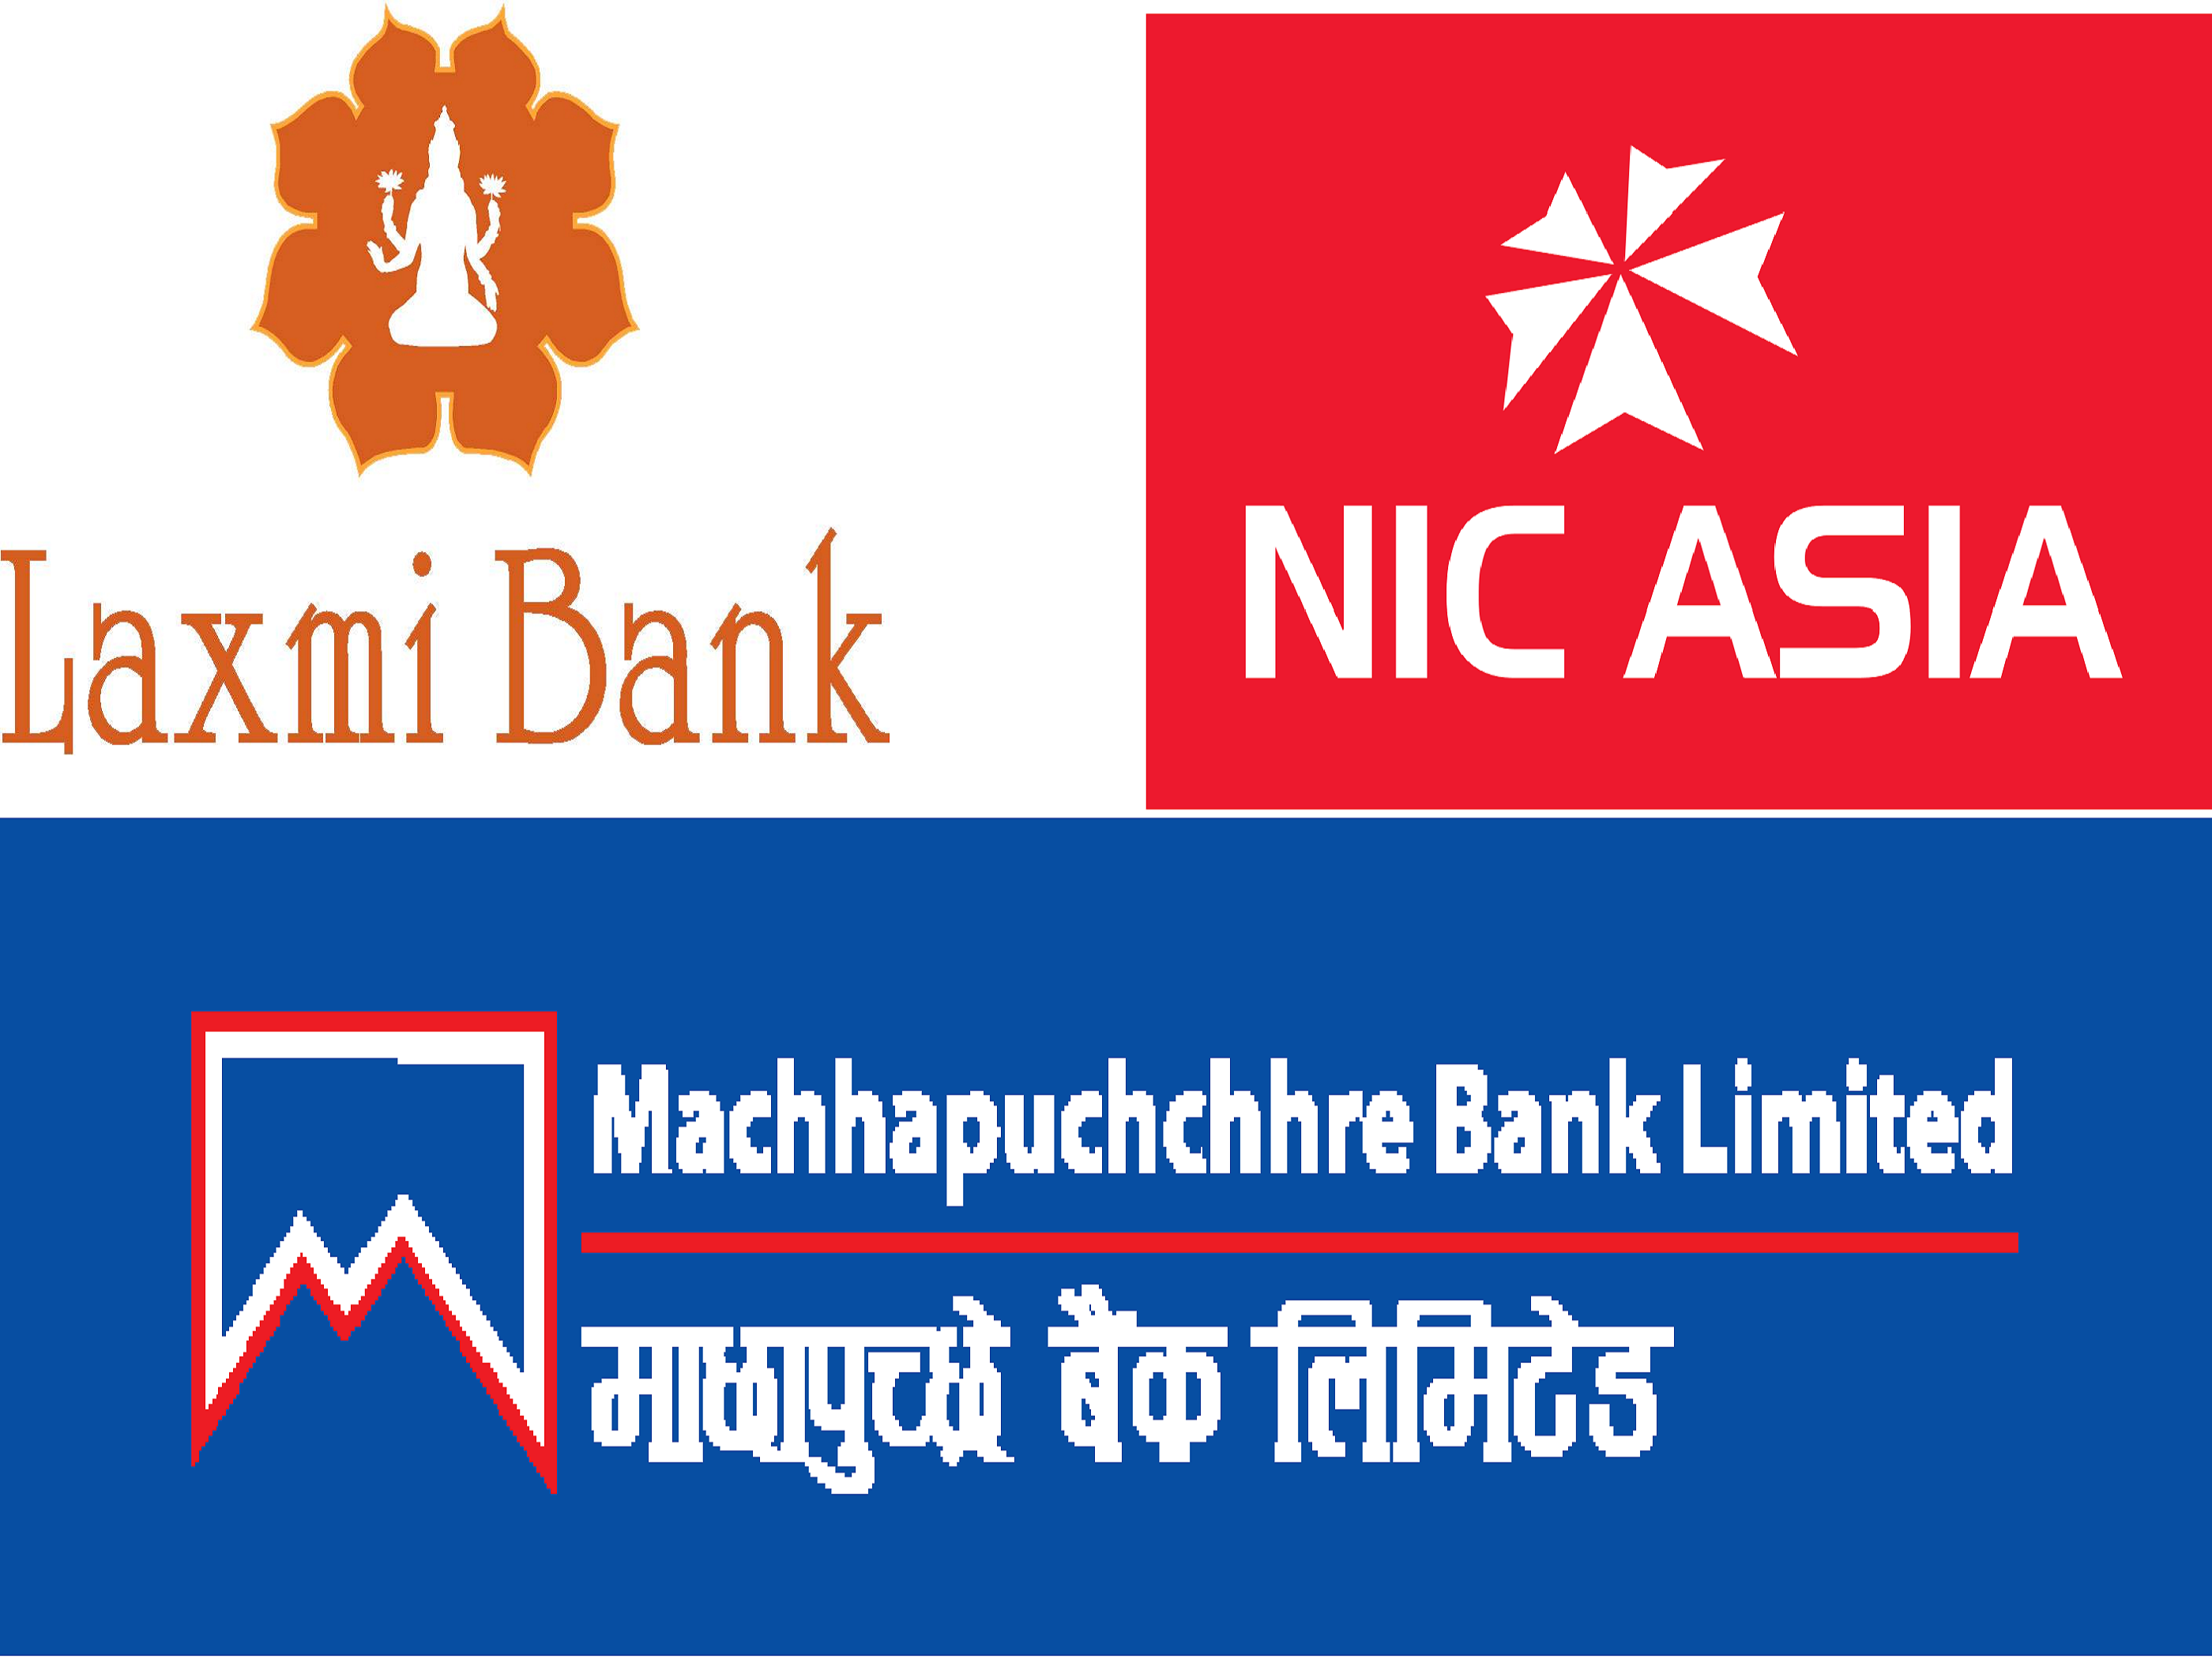 Will shareholders of NIC Asia and Machhapuchchhre Bank bear the brunt of NRB as the shareholders of Laxmi Bank?